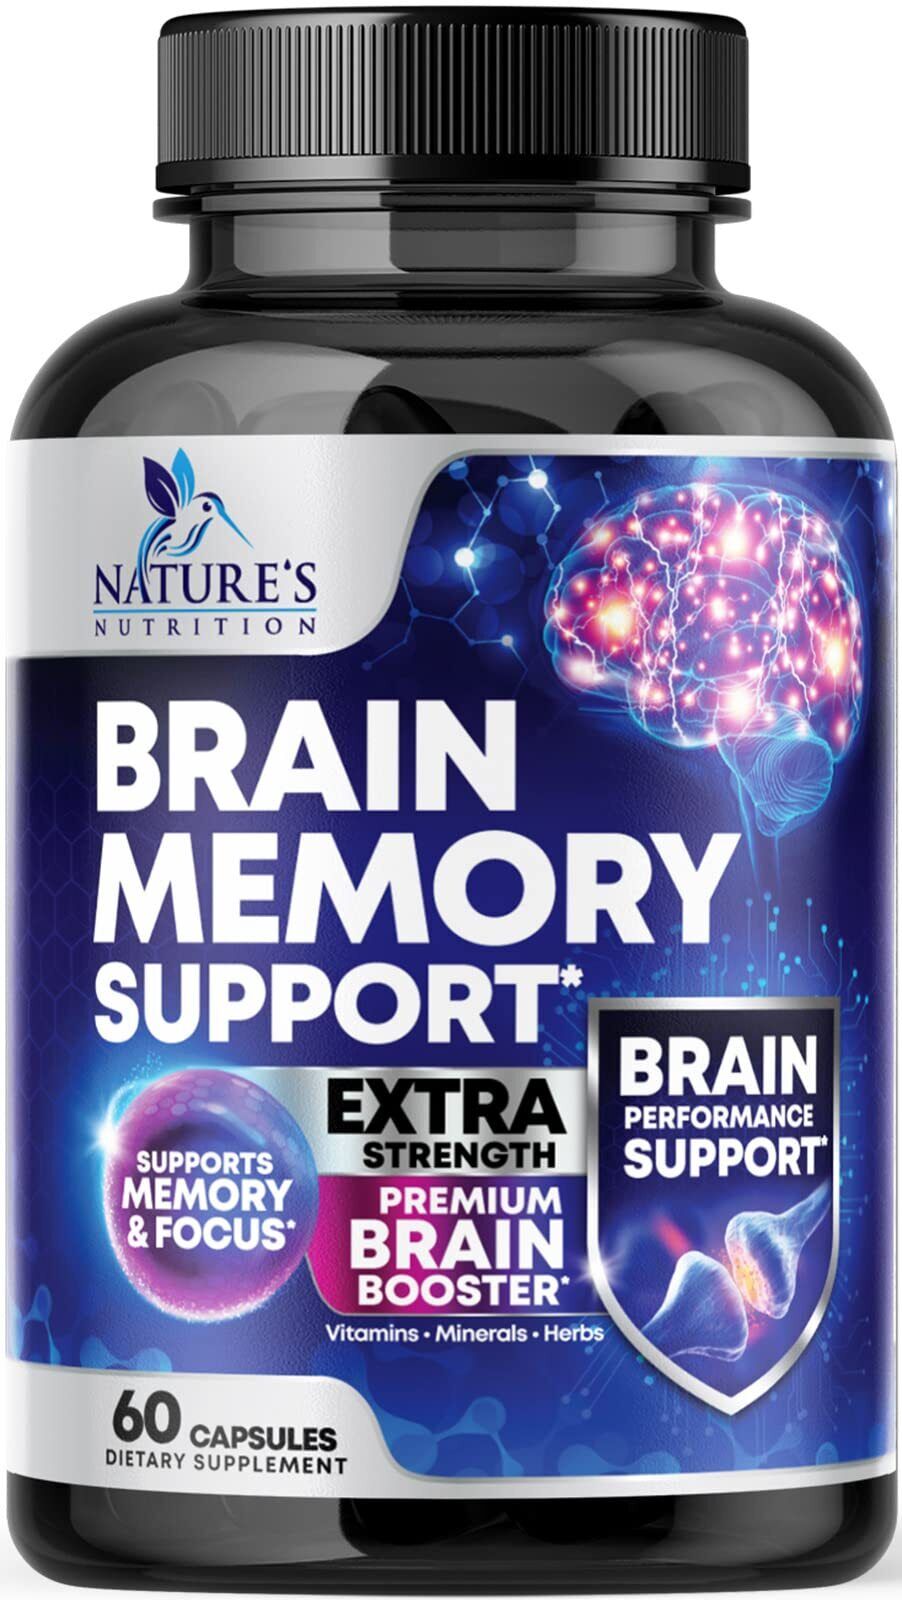 Brain Booster Nootropic Supplement 1000mg Support Focus Energy Memory & Clarity